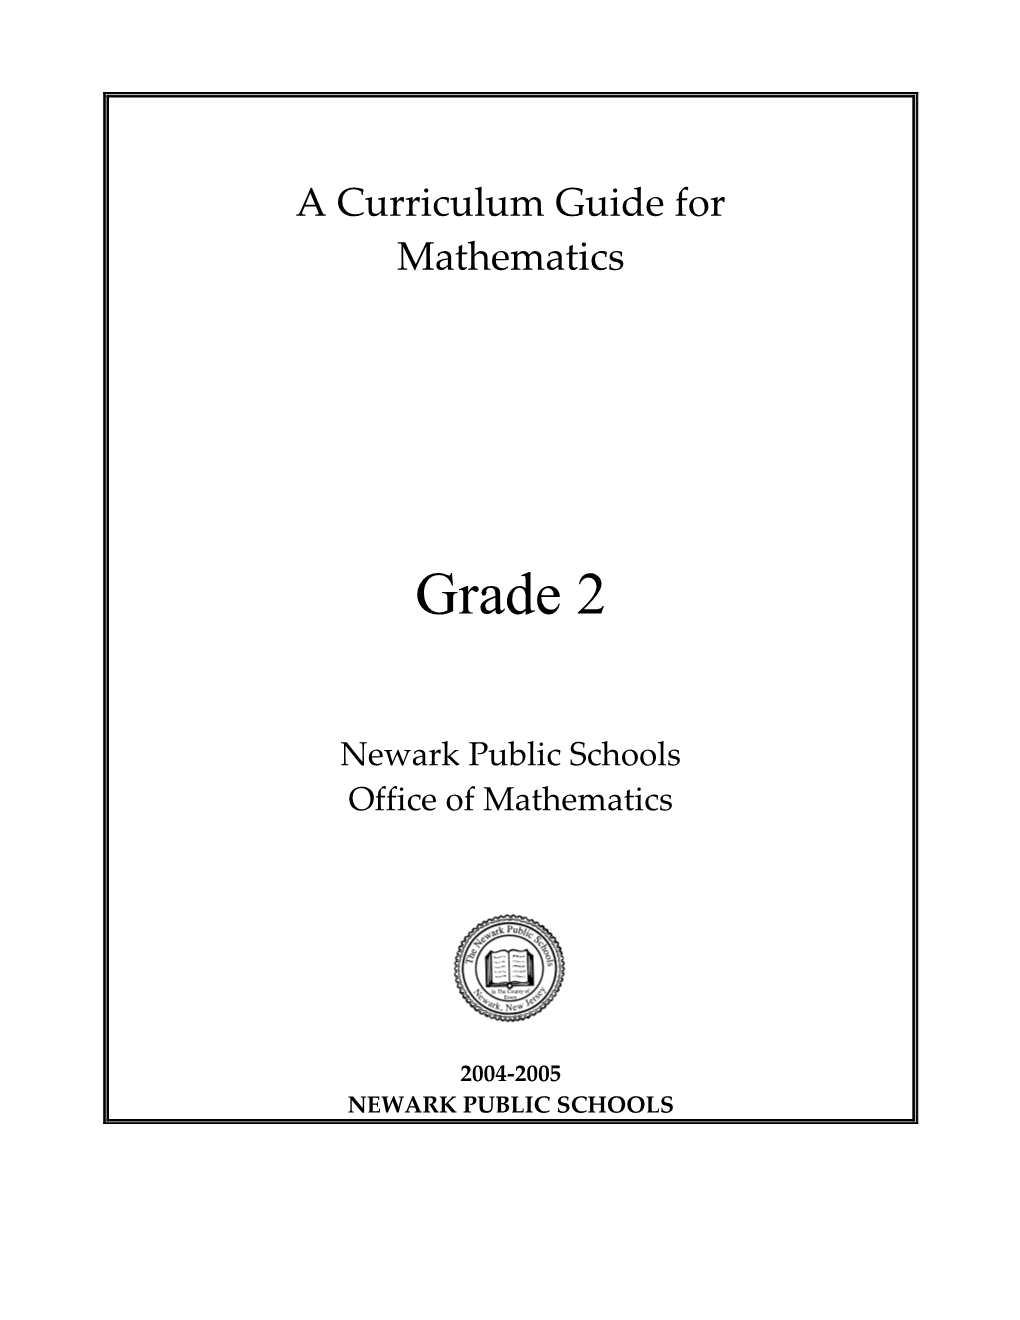 A Curriculum Guide For